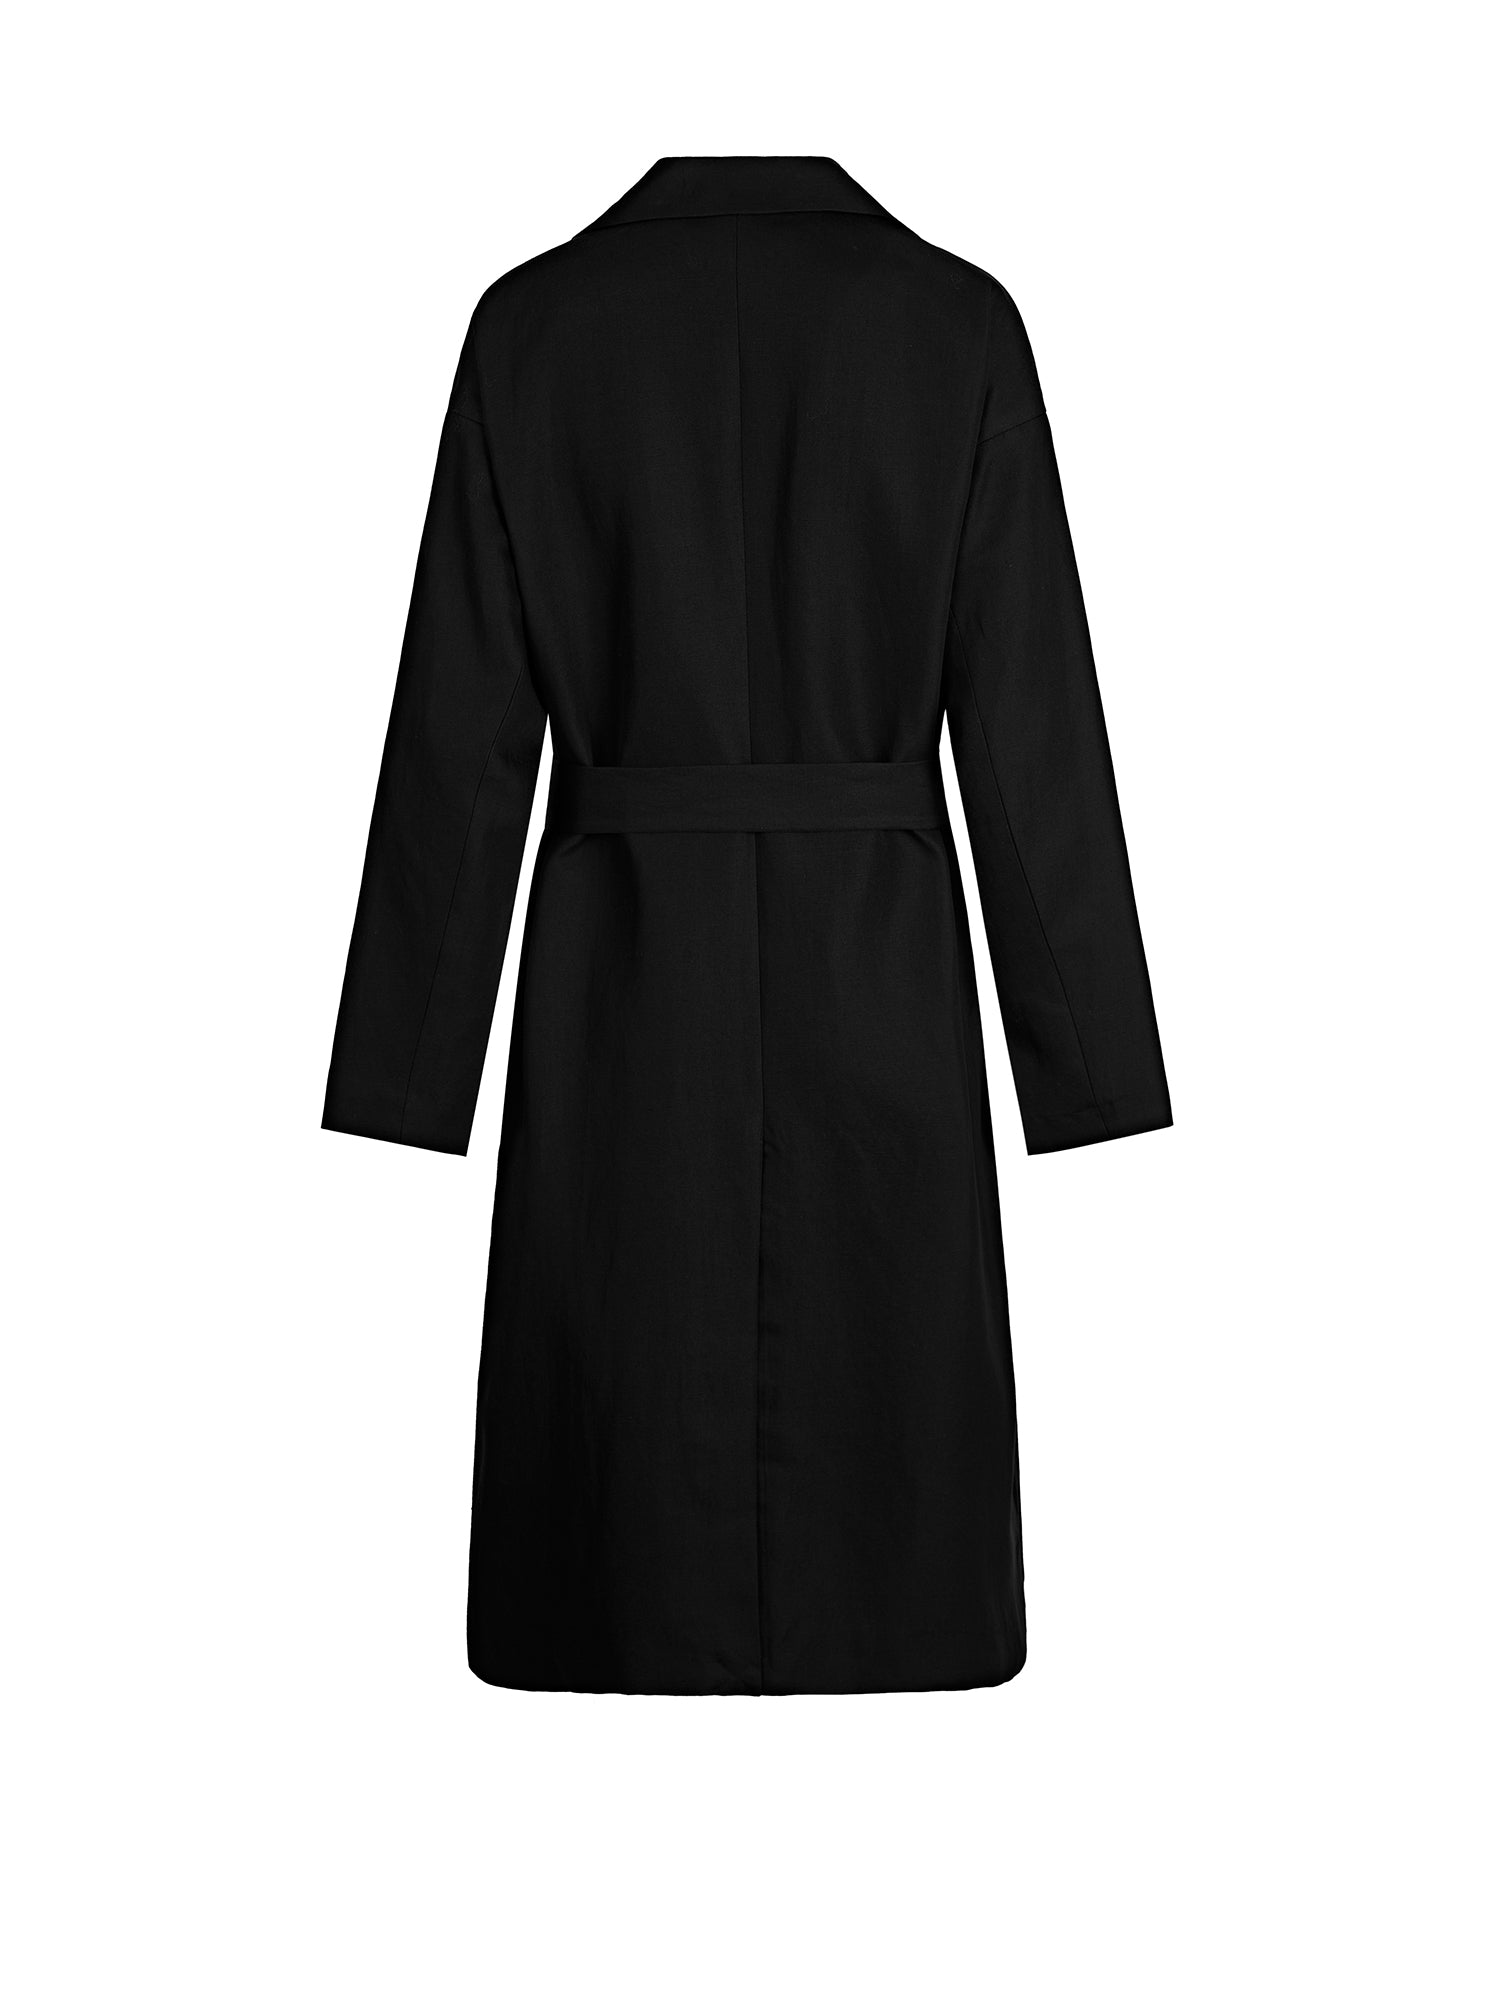 Commuter Style Patchwork Receiving Waist Long Trench Coat